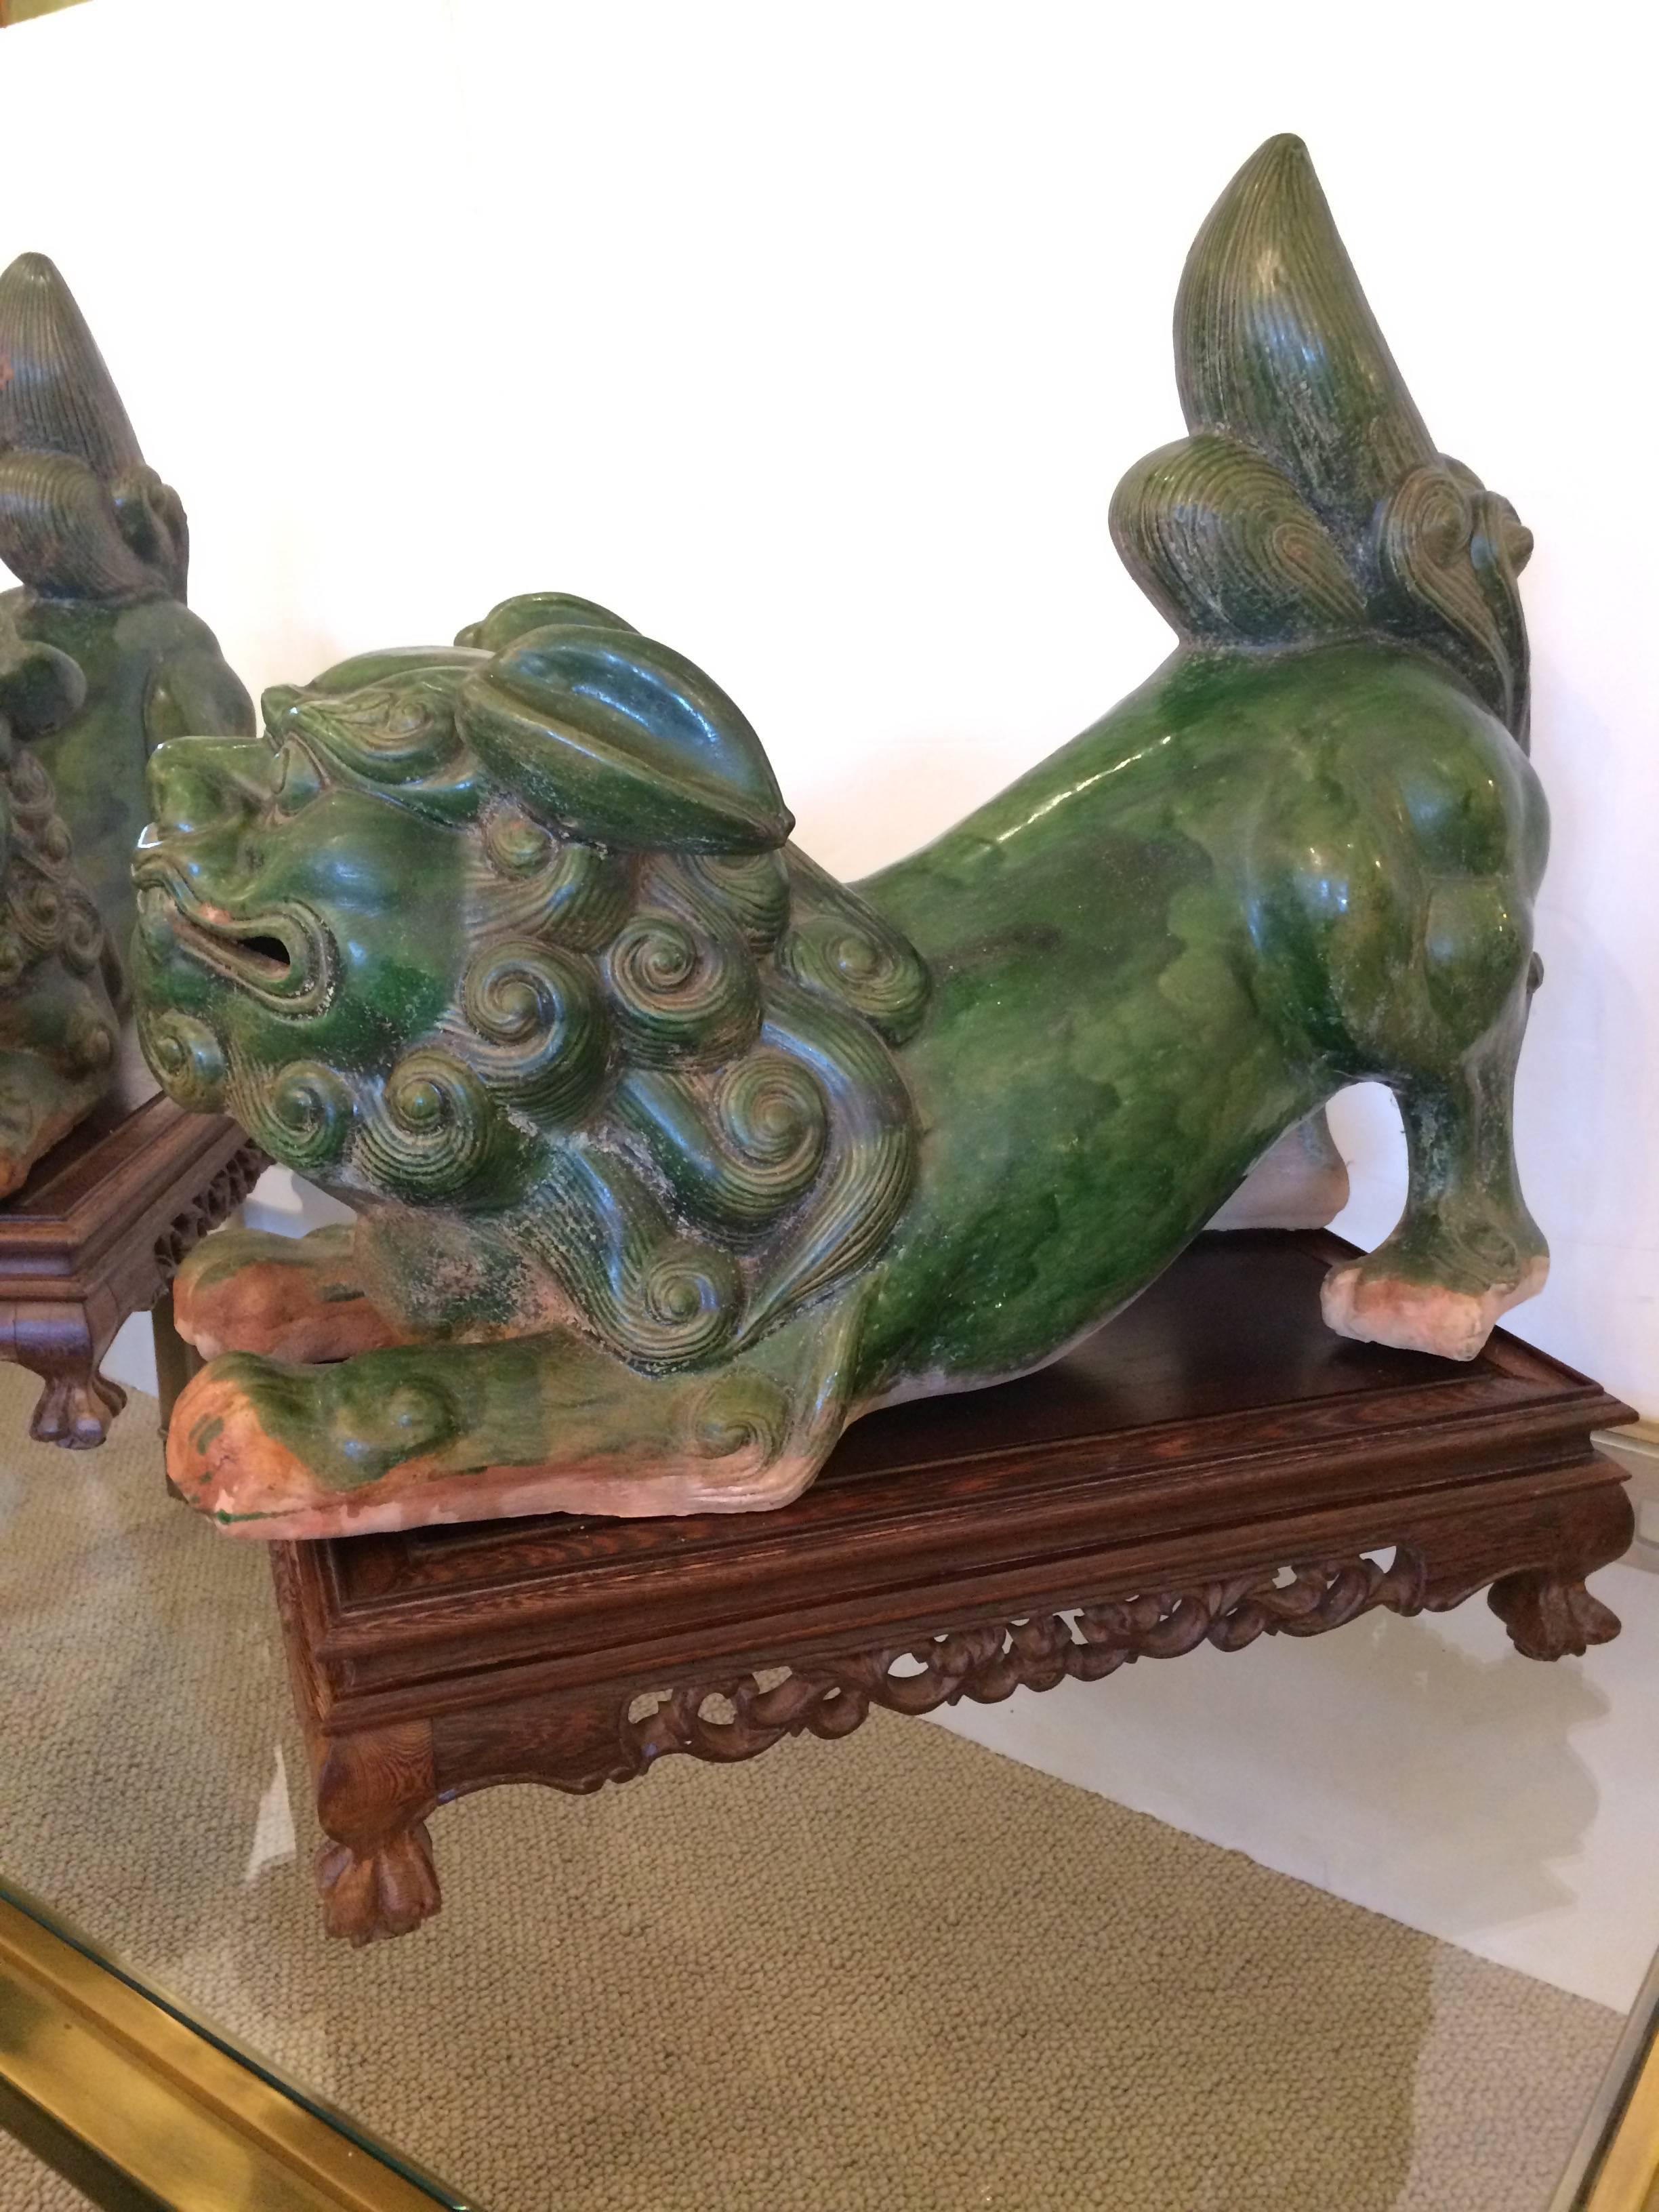 Spectacular pair of terra cotta glazed crouching foo dogs on rosewood stands.